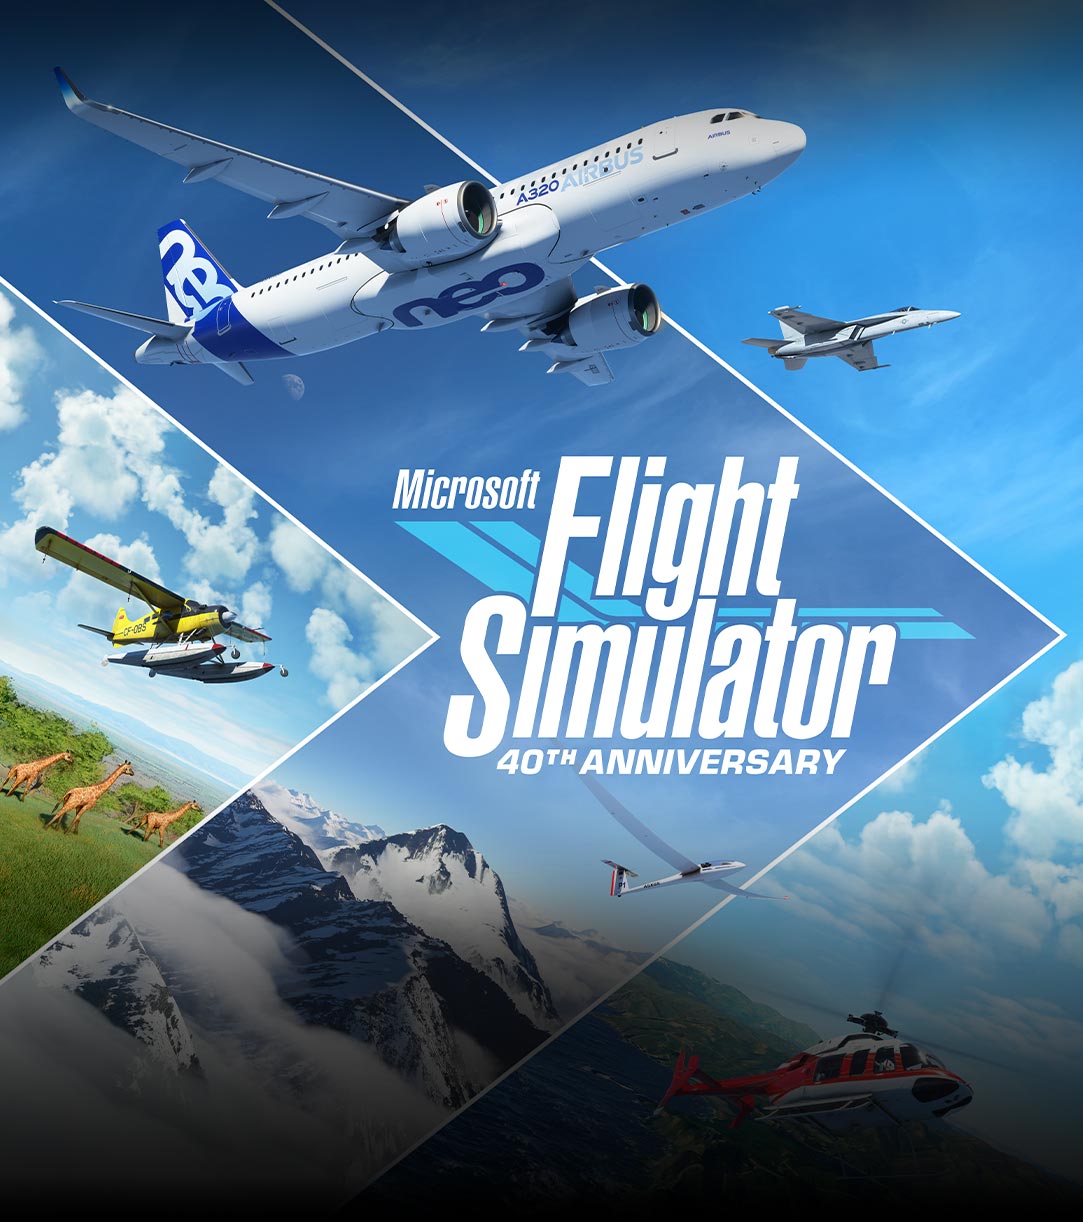 Microsoft Flight Simulator 40th Anniversary logo, planes and scenes from different parts of the world